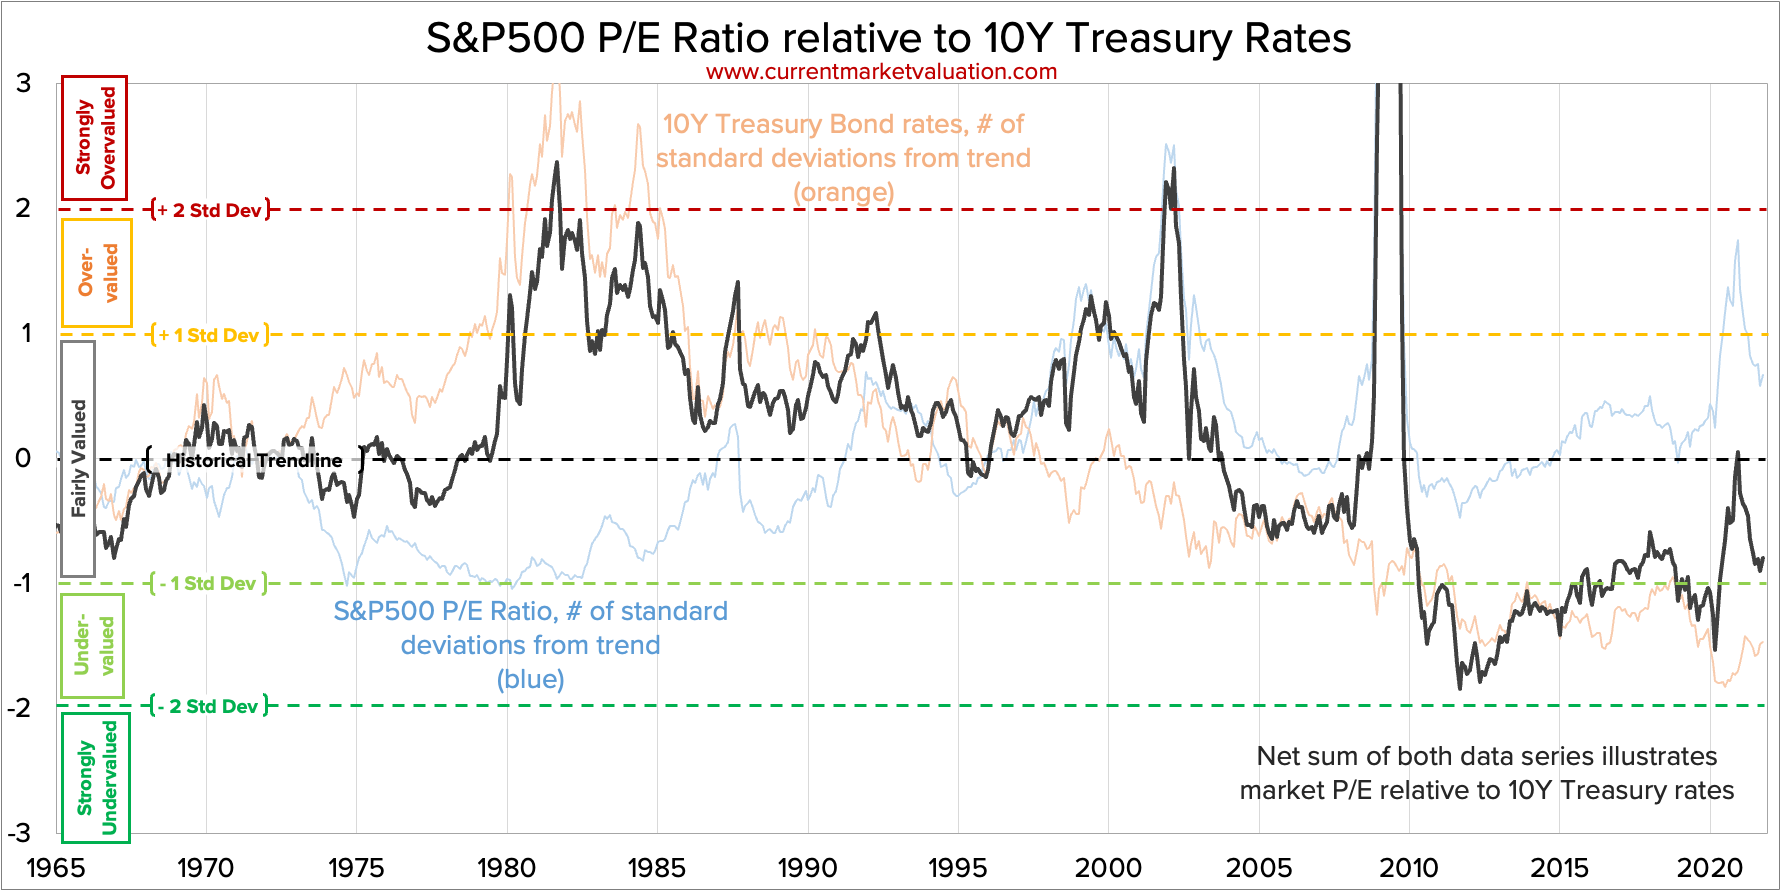 Market Valuation based on P/E ratio relative to 10Y Treasury rates